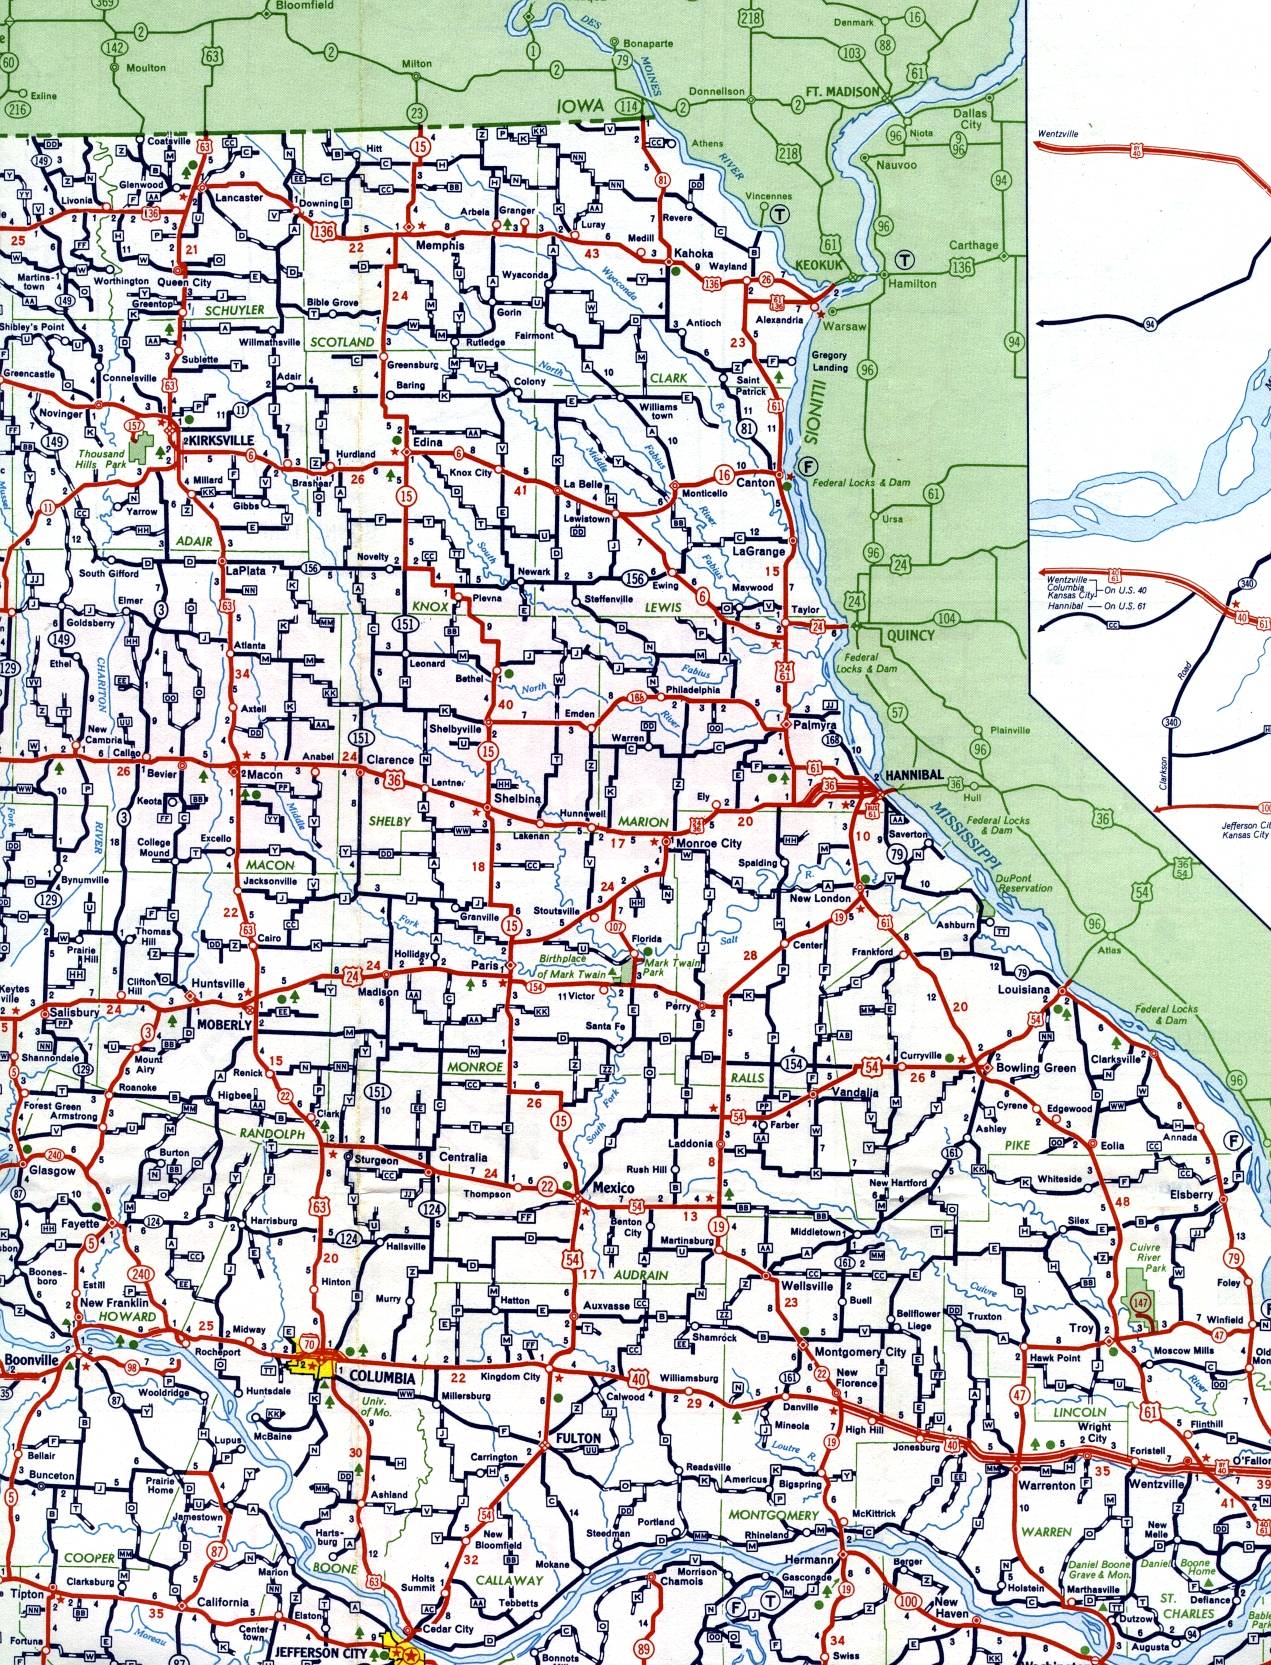 Northeast corner of Missouri from 1959 official highway map